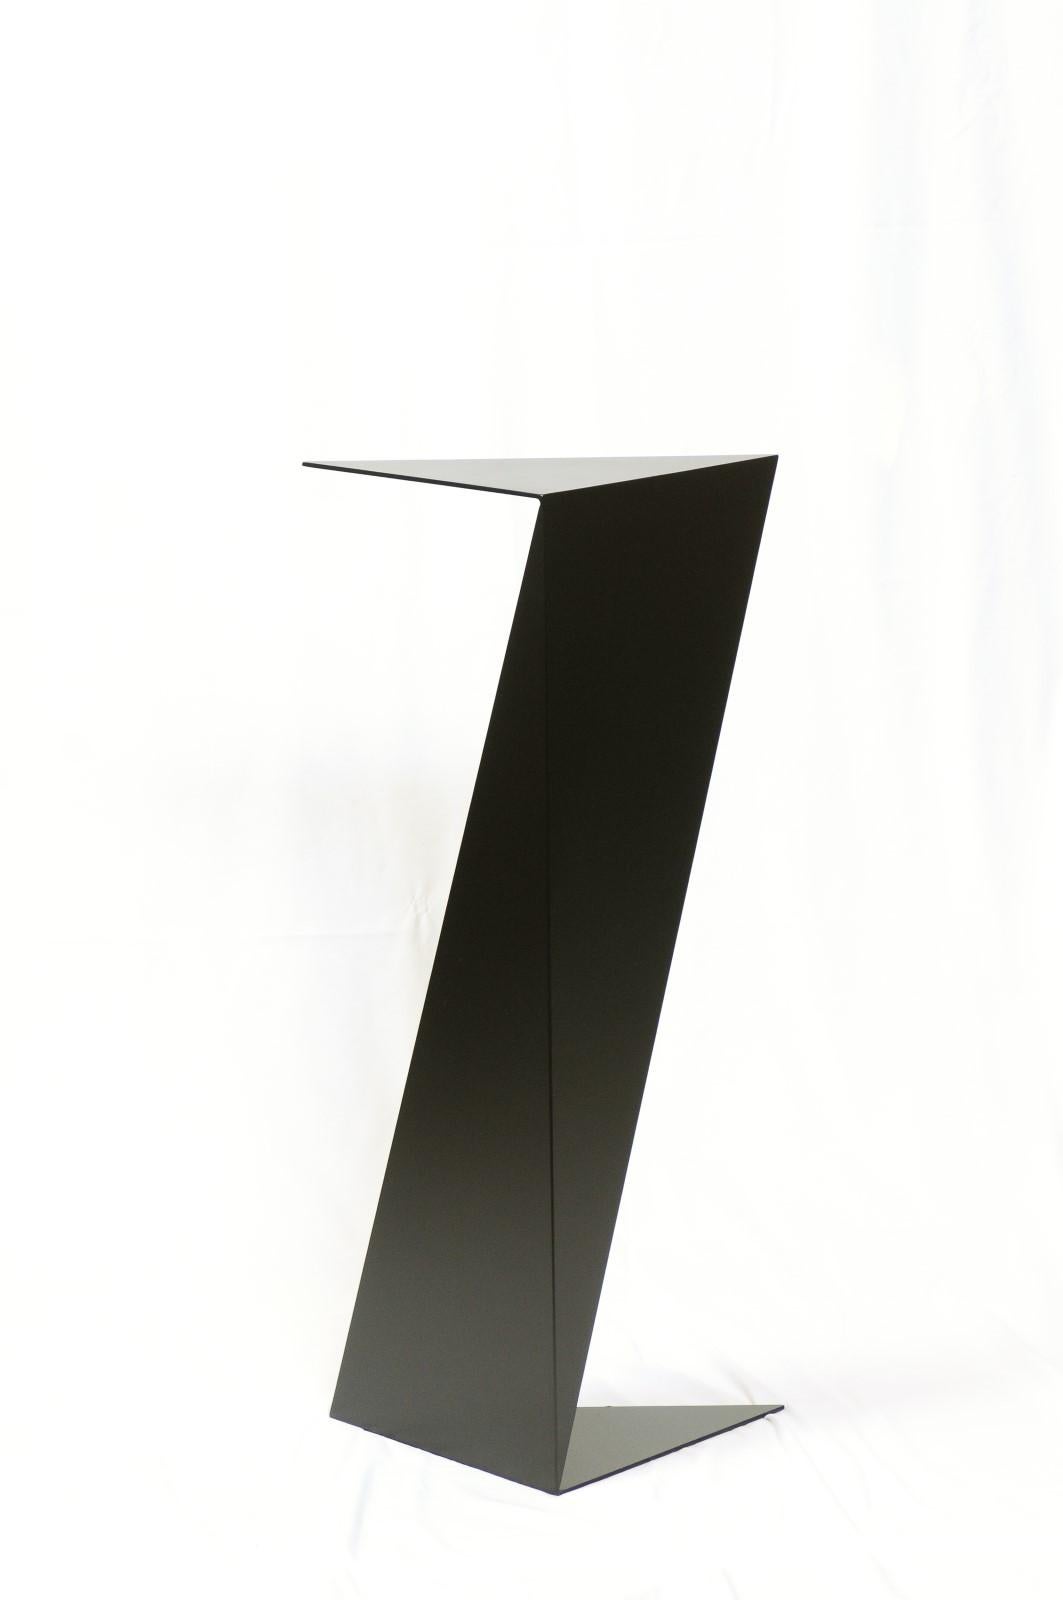 Origami Style Steel Pedestal Stand, Black Finish 6